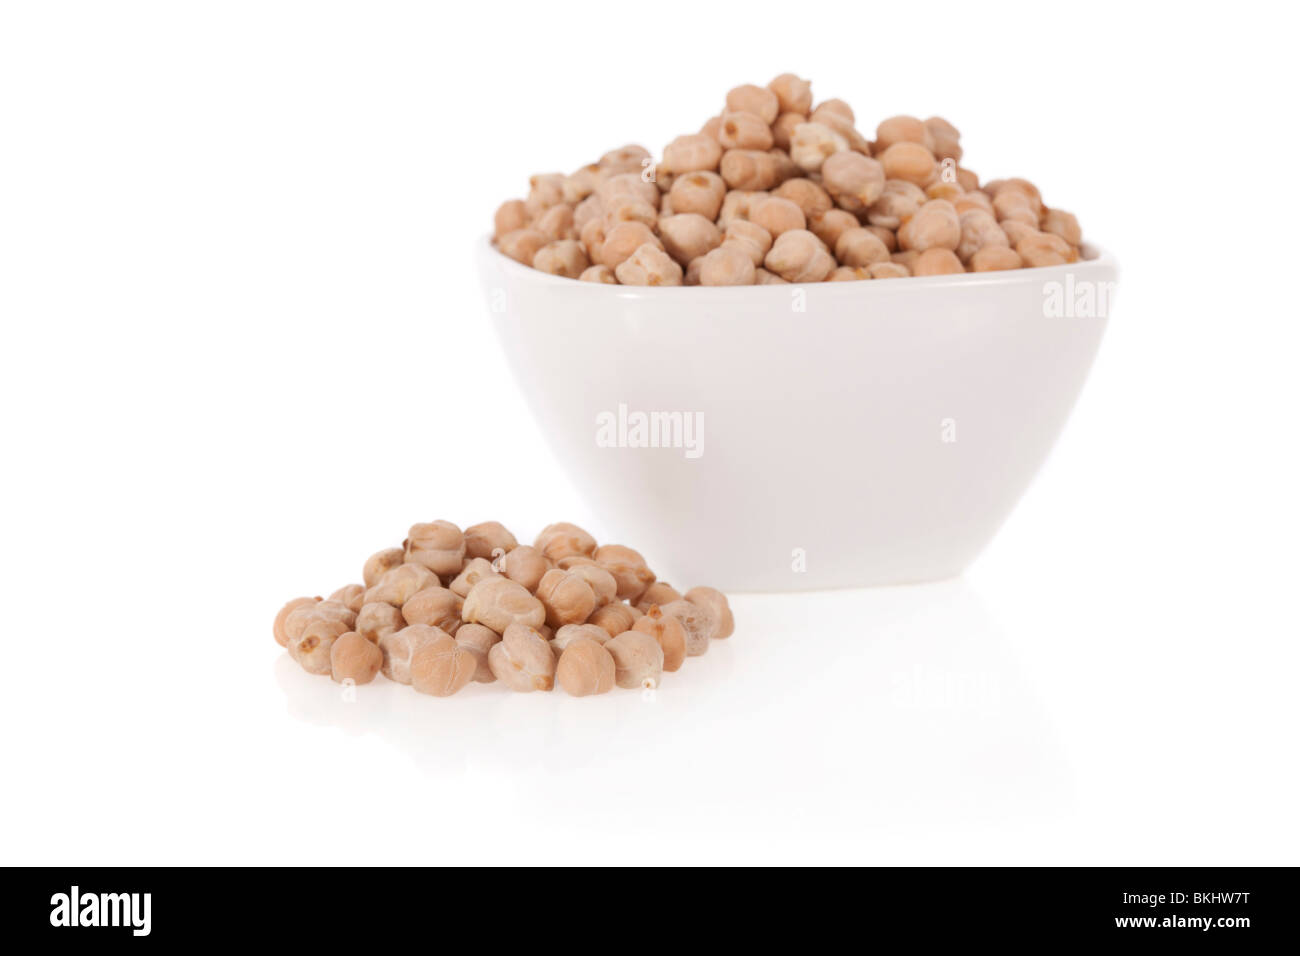 White chickpeas in a bowl isolated on a white background Stock Photo